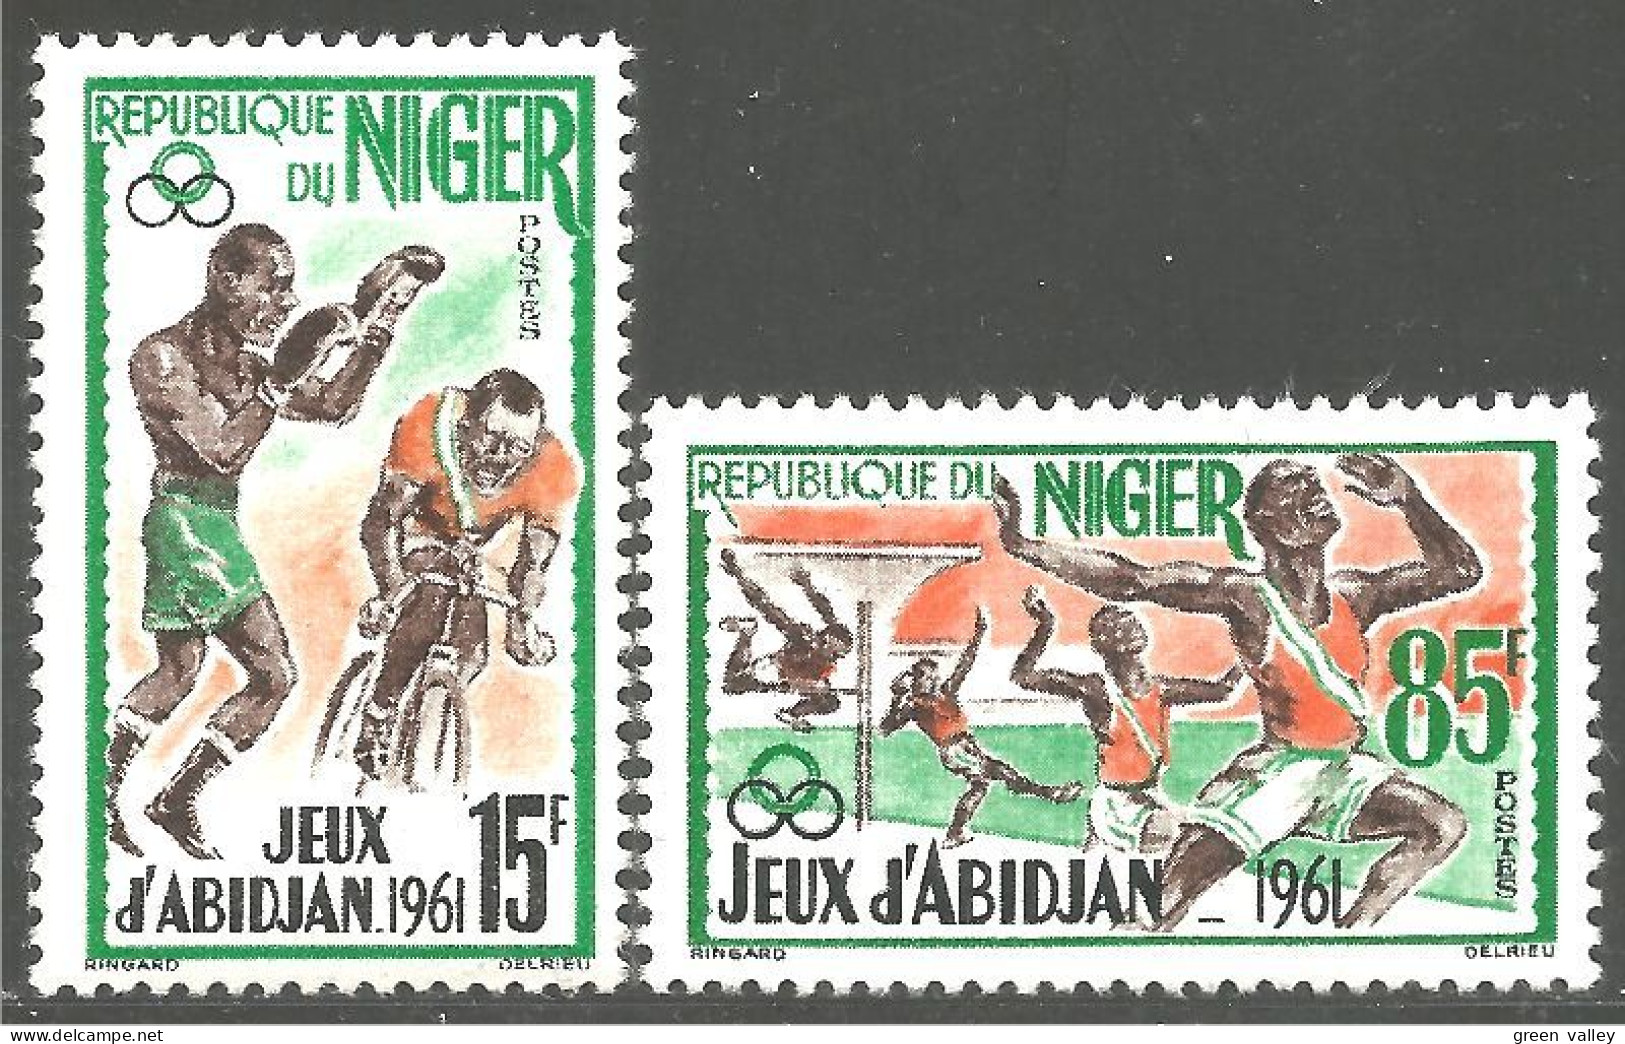 678 Niger Boxe Boxing Cyclisme Ciclismo Bicycle Course Running MH * Neuf (NGR-71) - Niger (1960-...)